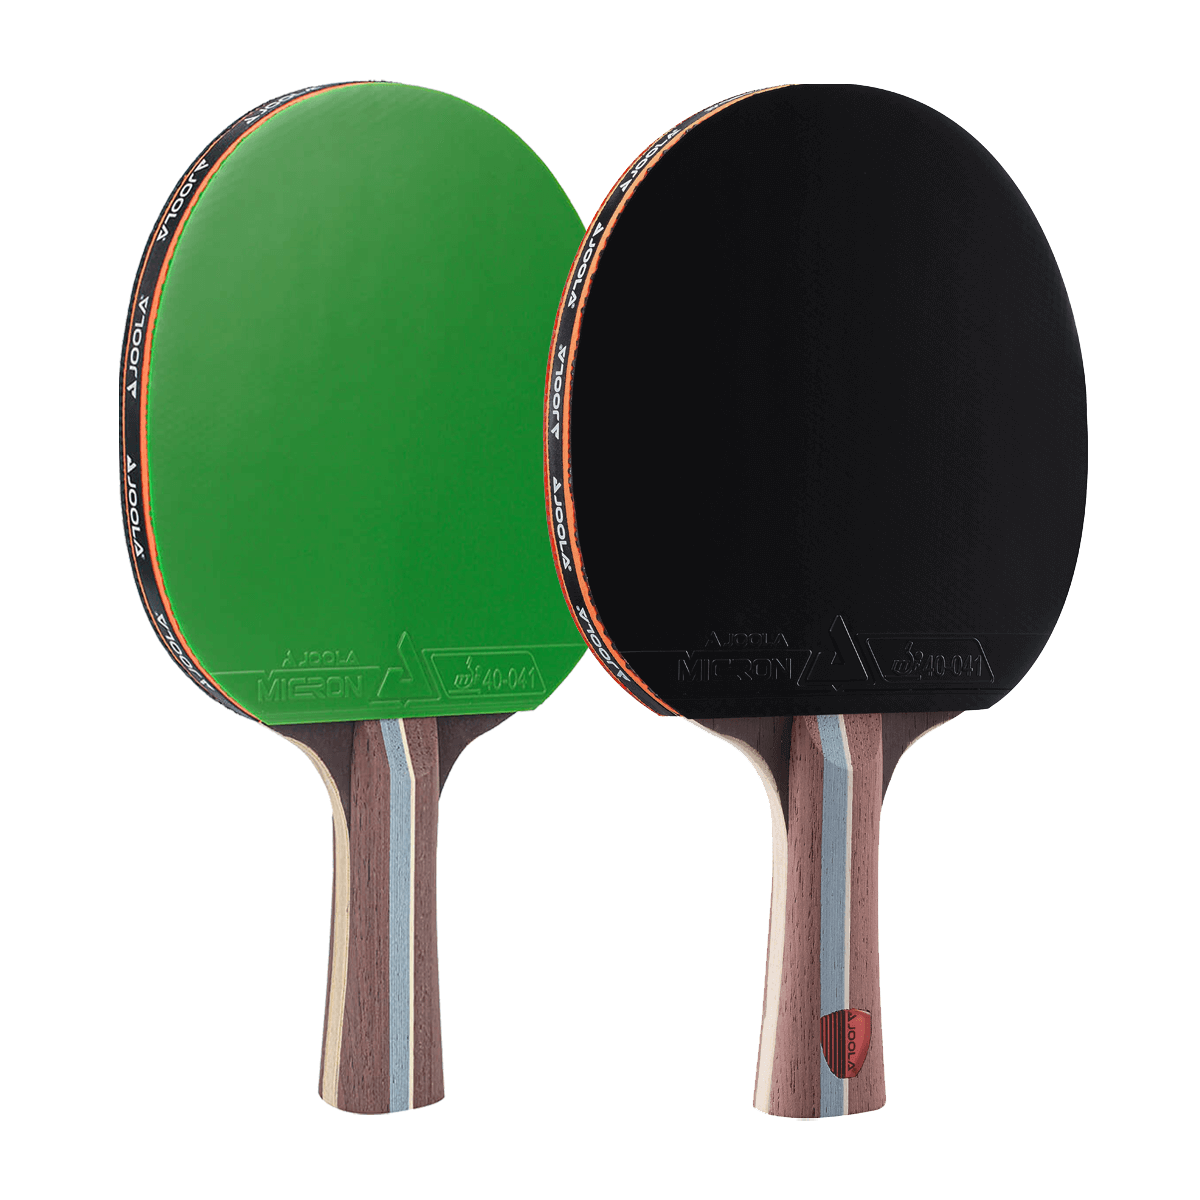 Champion Sport Pips-Out Table Tennis Paddle